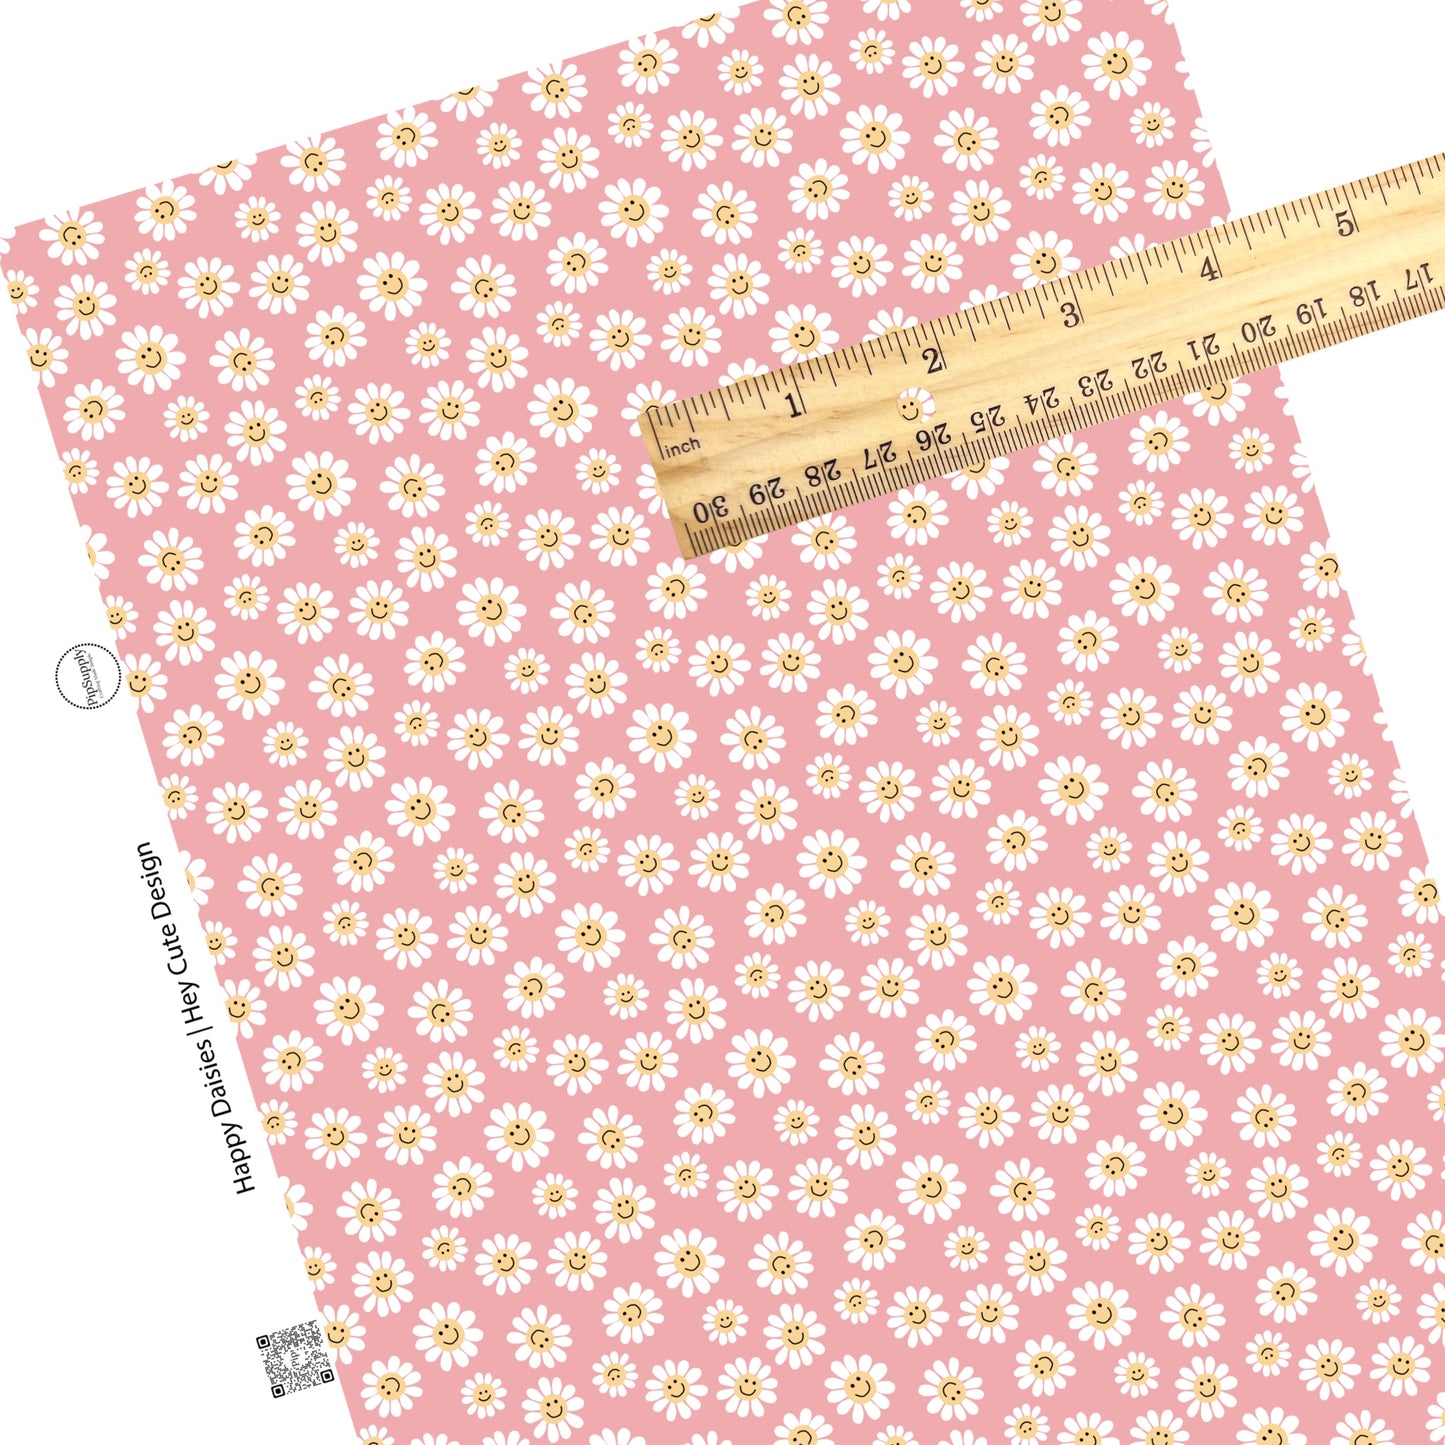 These summer faux leather sheets contain the following design elements: smiley faces on daisy flowers on pink. Our CPSIA compliant faux leather sheets or rolls can be used for all types of crafting projects.